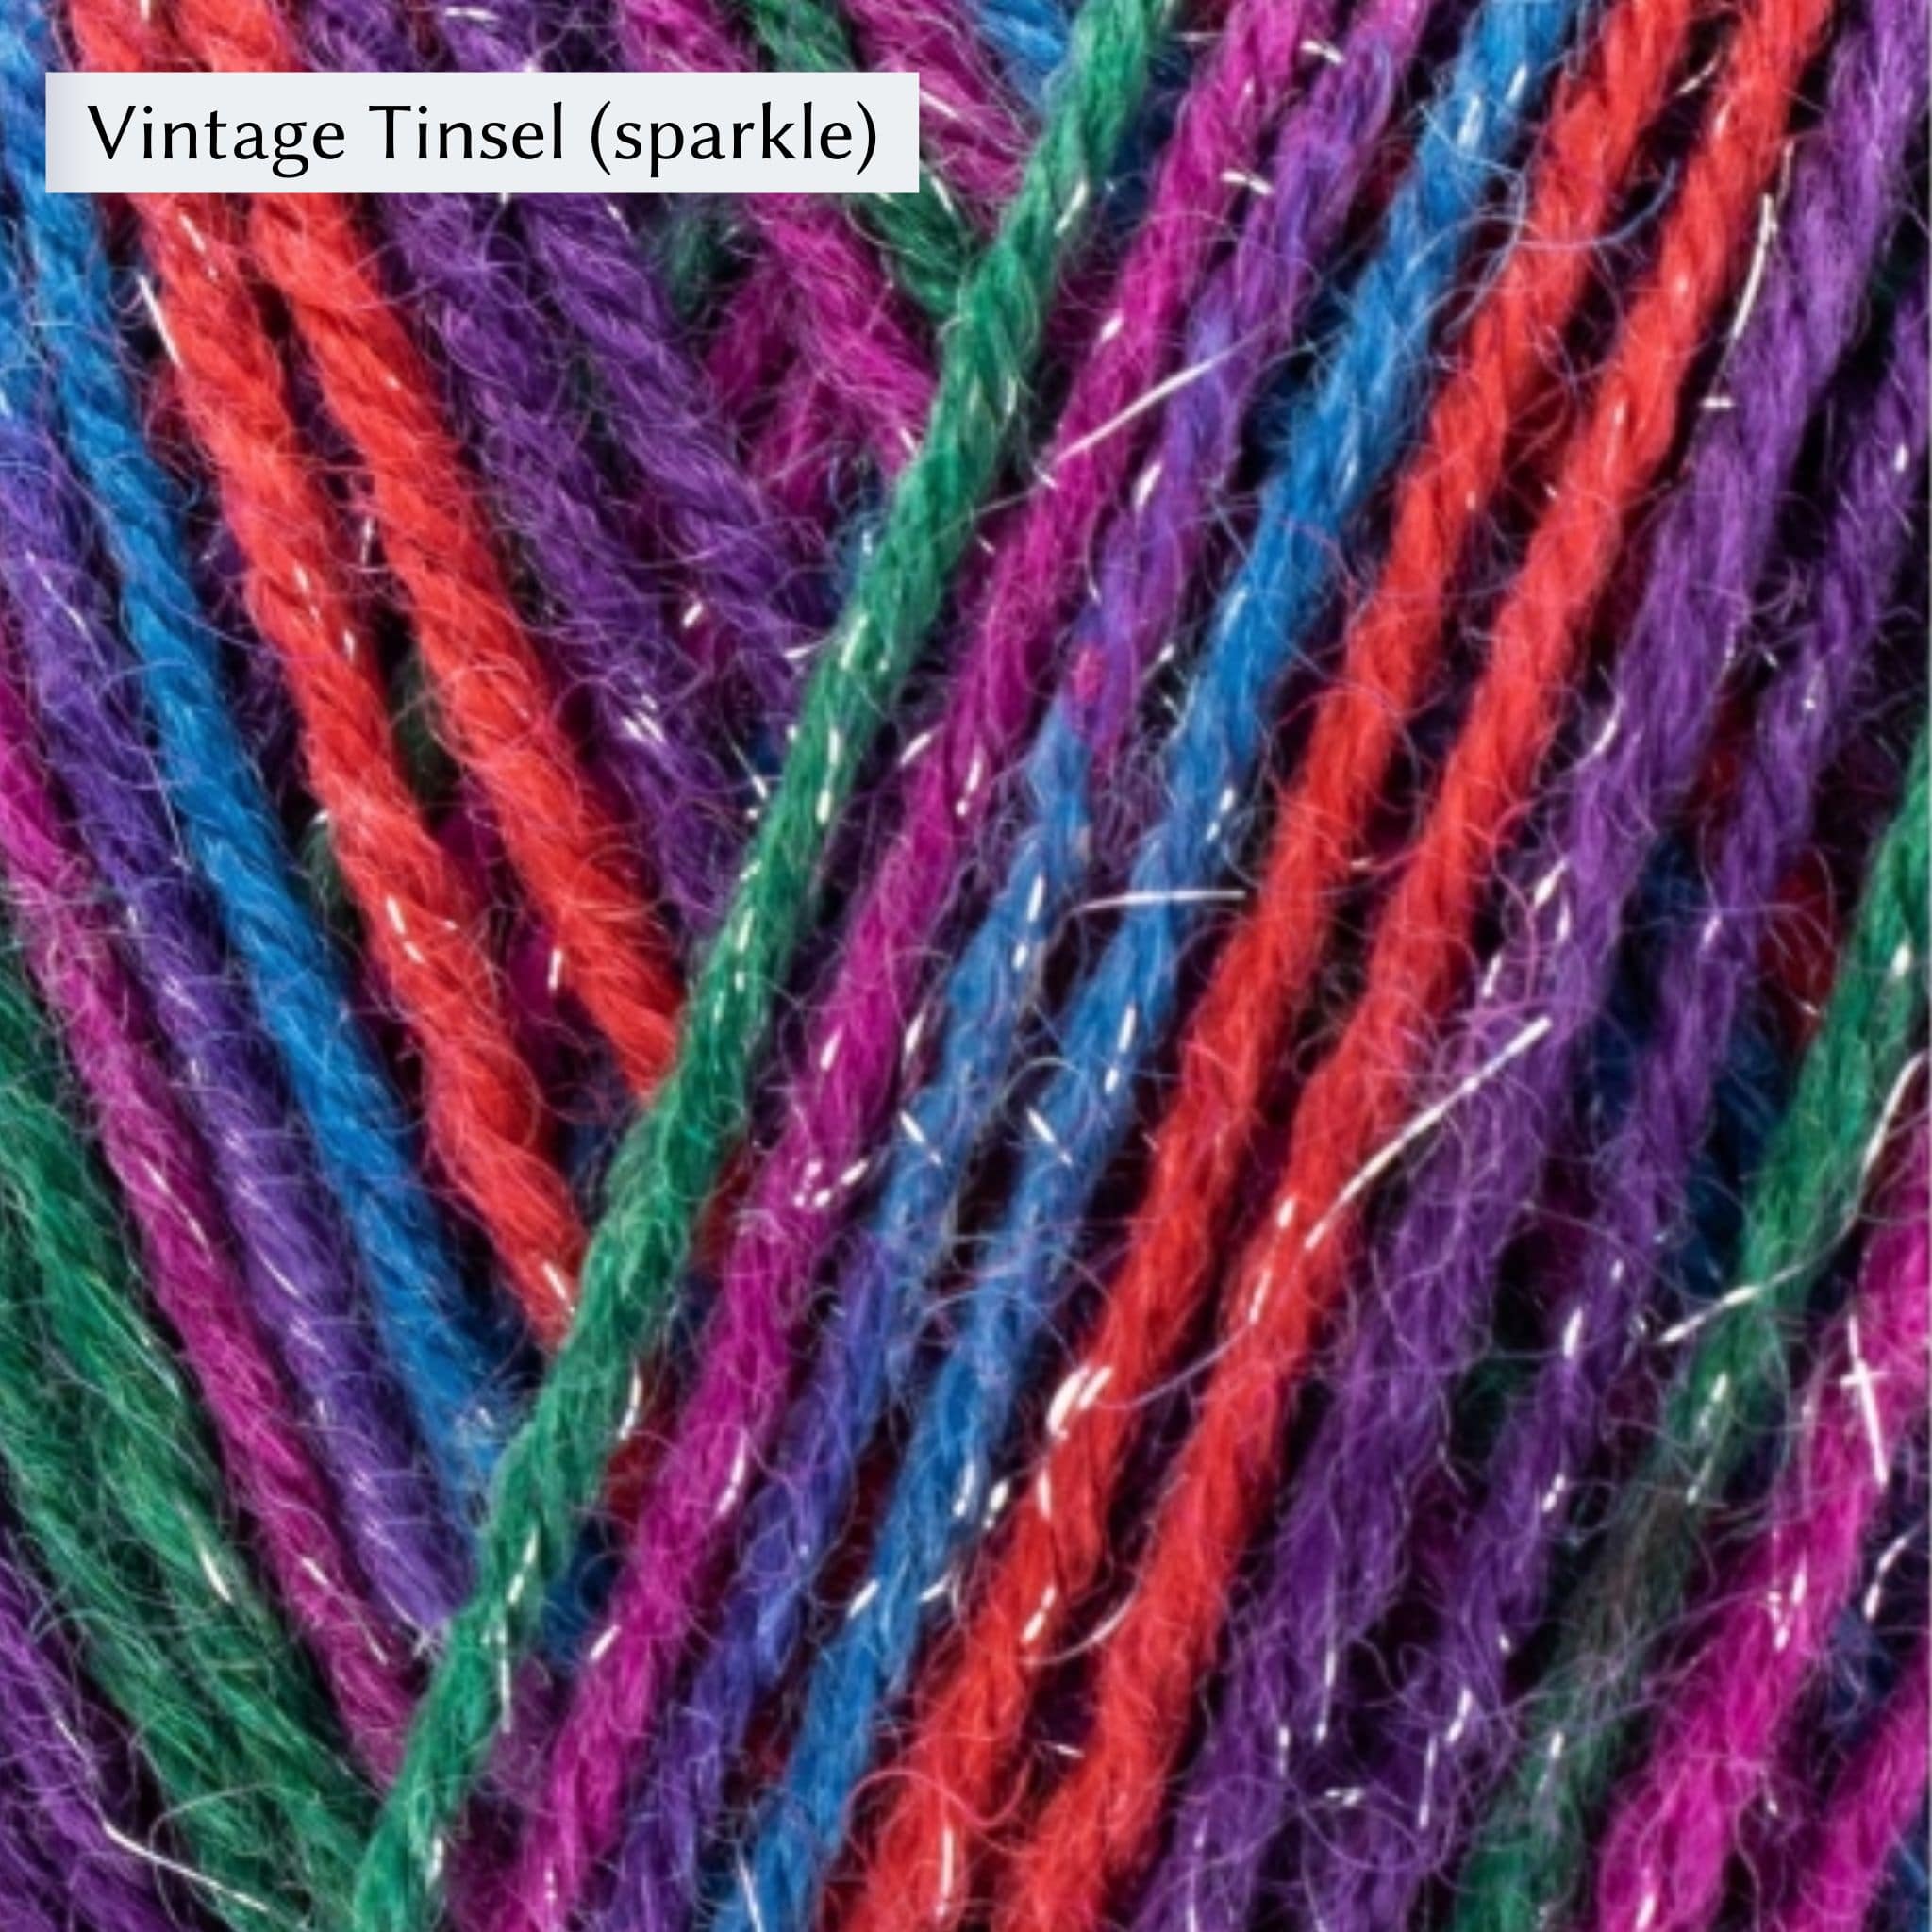 West Yorkshire Spinners Signature 4ply yarn, fingering weight, in color Vintage Tinsel (sparkle), striping in purple, red, blue, magenta, and green, with sparkle